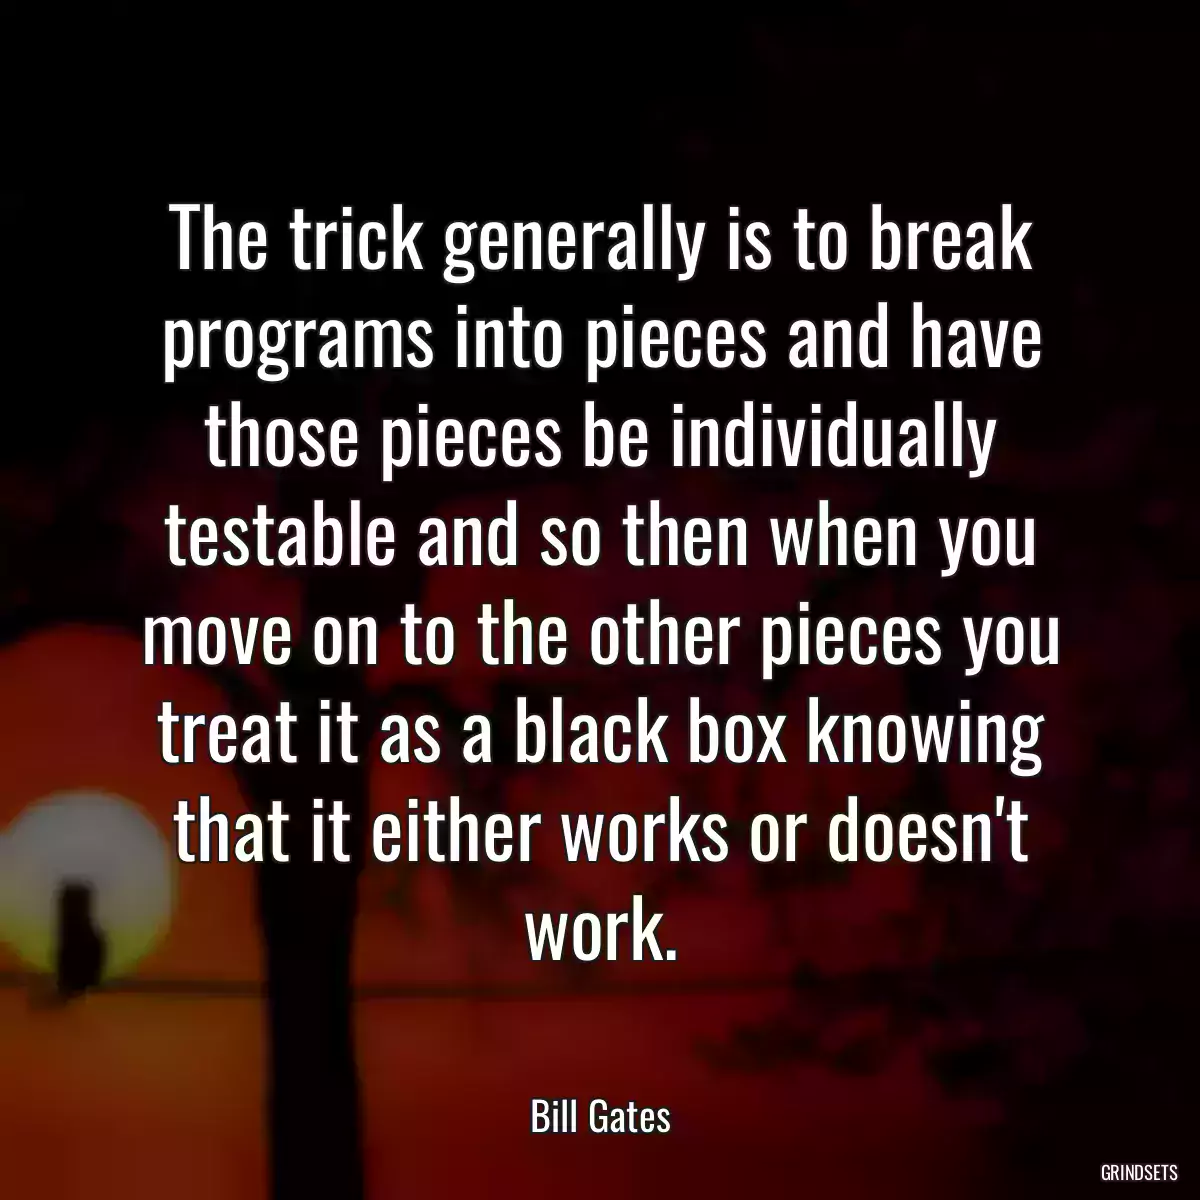 The trick generally is to break programs into pieces and have those pieces be individually testable and so then when you move on to the other pieces you treat it as a black box knowing that it either works or doesn\'t work.